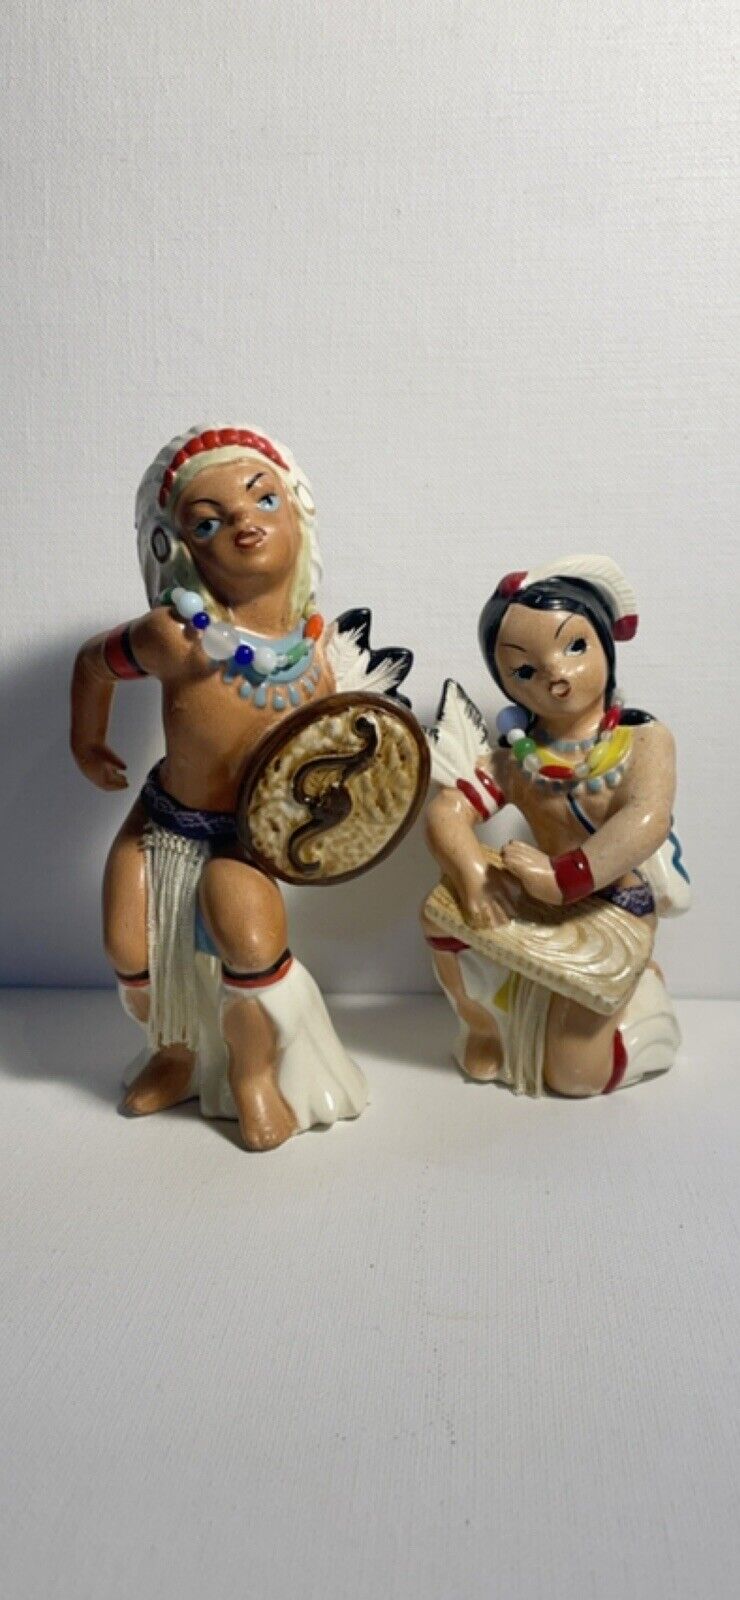 Vintage Indian ceramic figurine pair, By Wale, w/Real Bead And Rope Details,